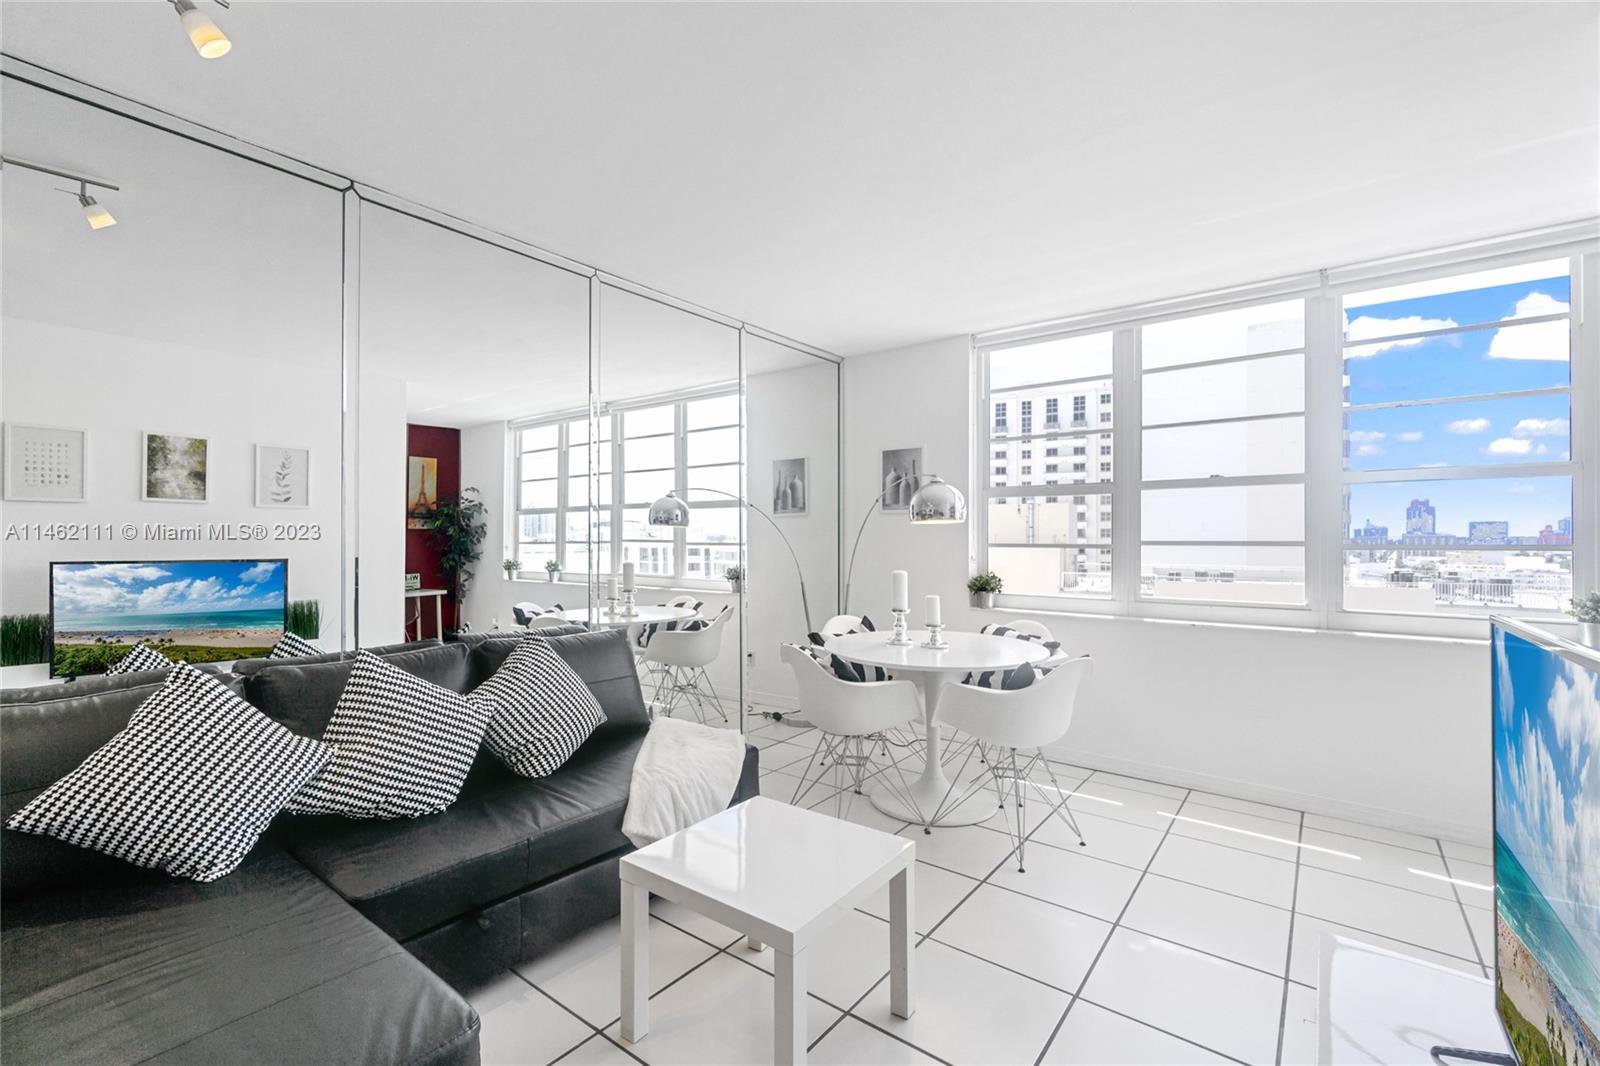 Fully renovated Jr.1Bed apartment located at 100 Lincoln Rd, Miami Beach, the apartment is perfect a